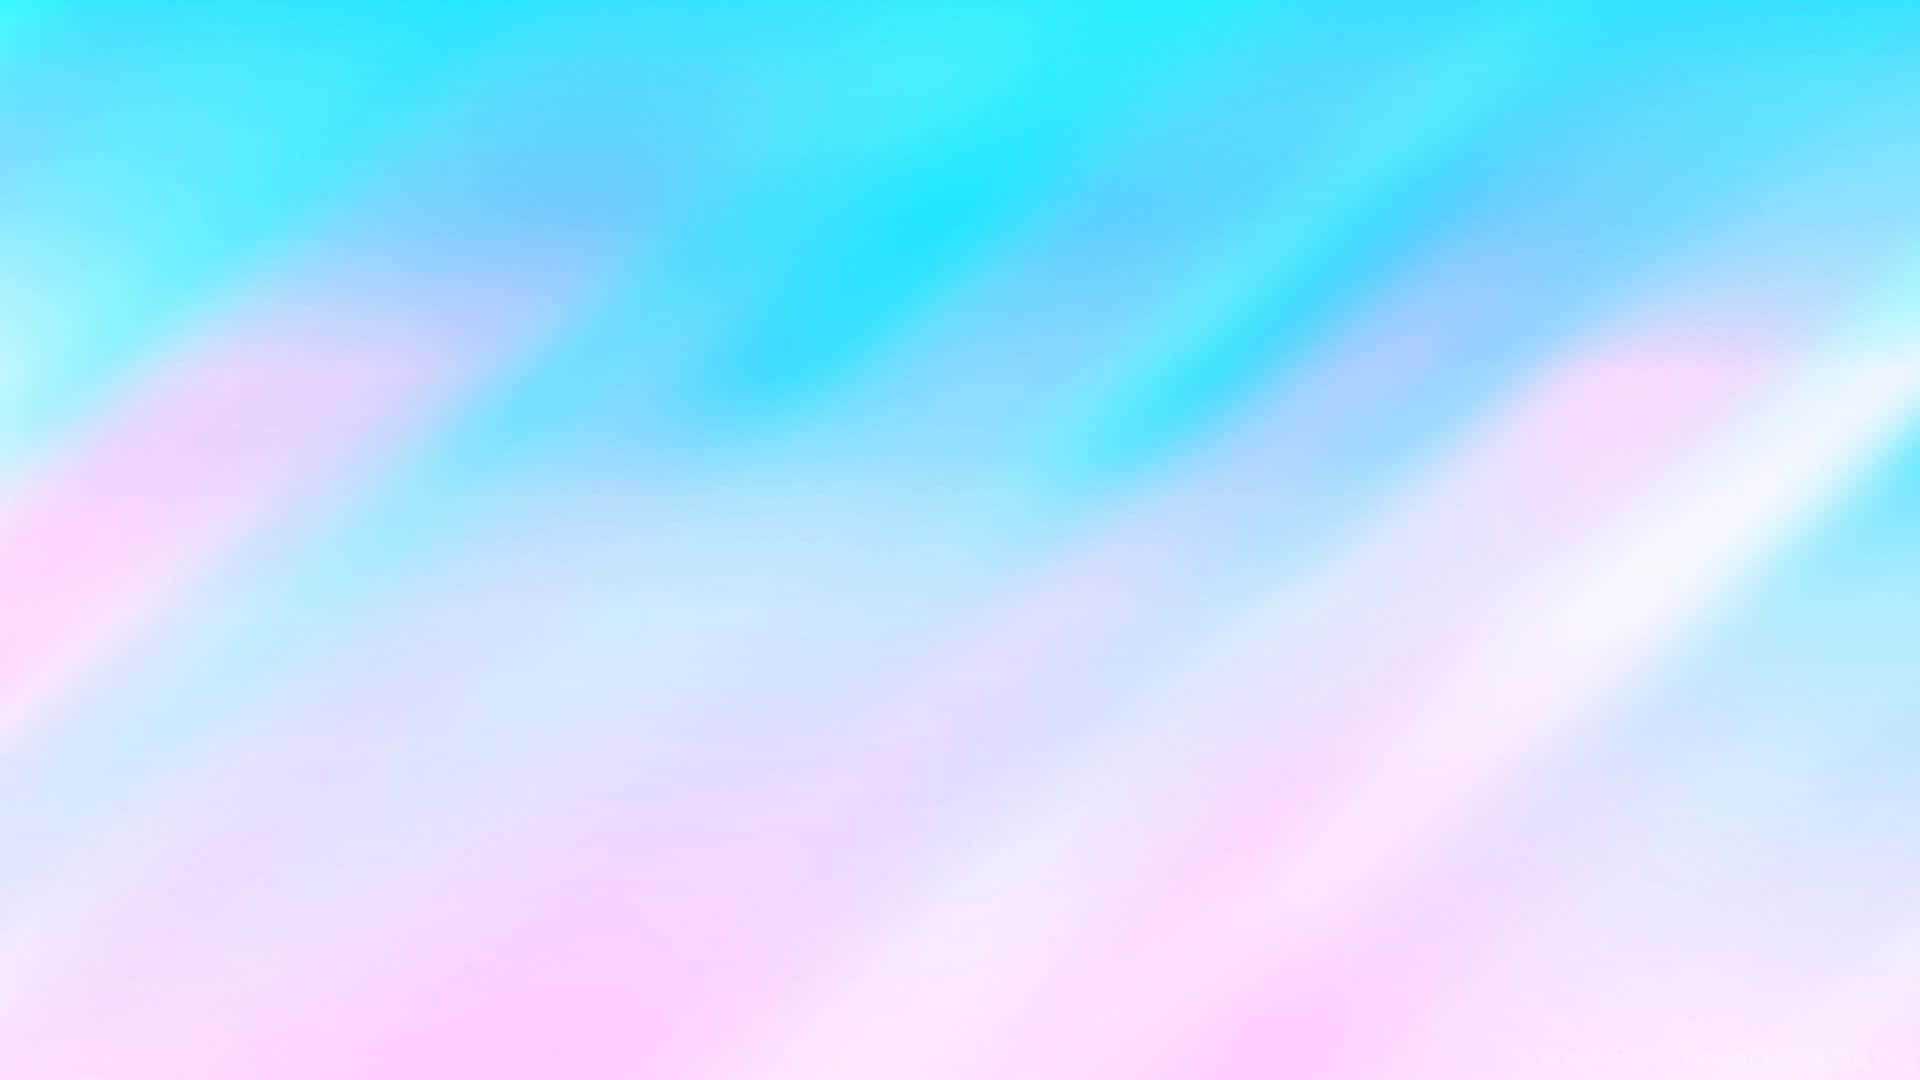 Vibrant pink and blue background